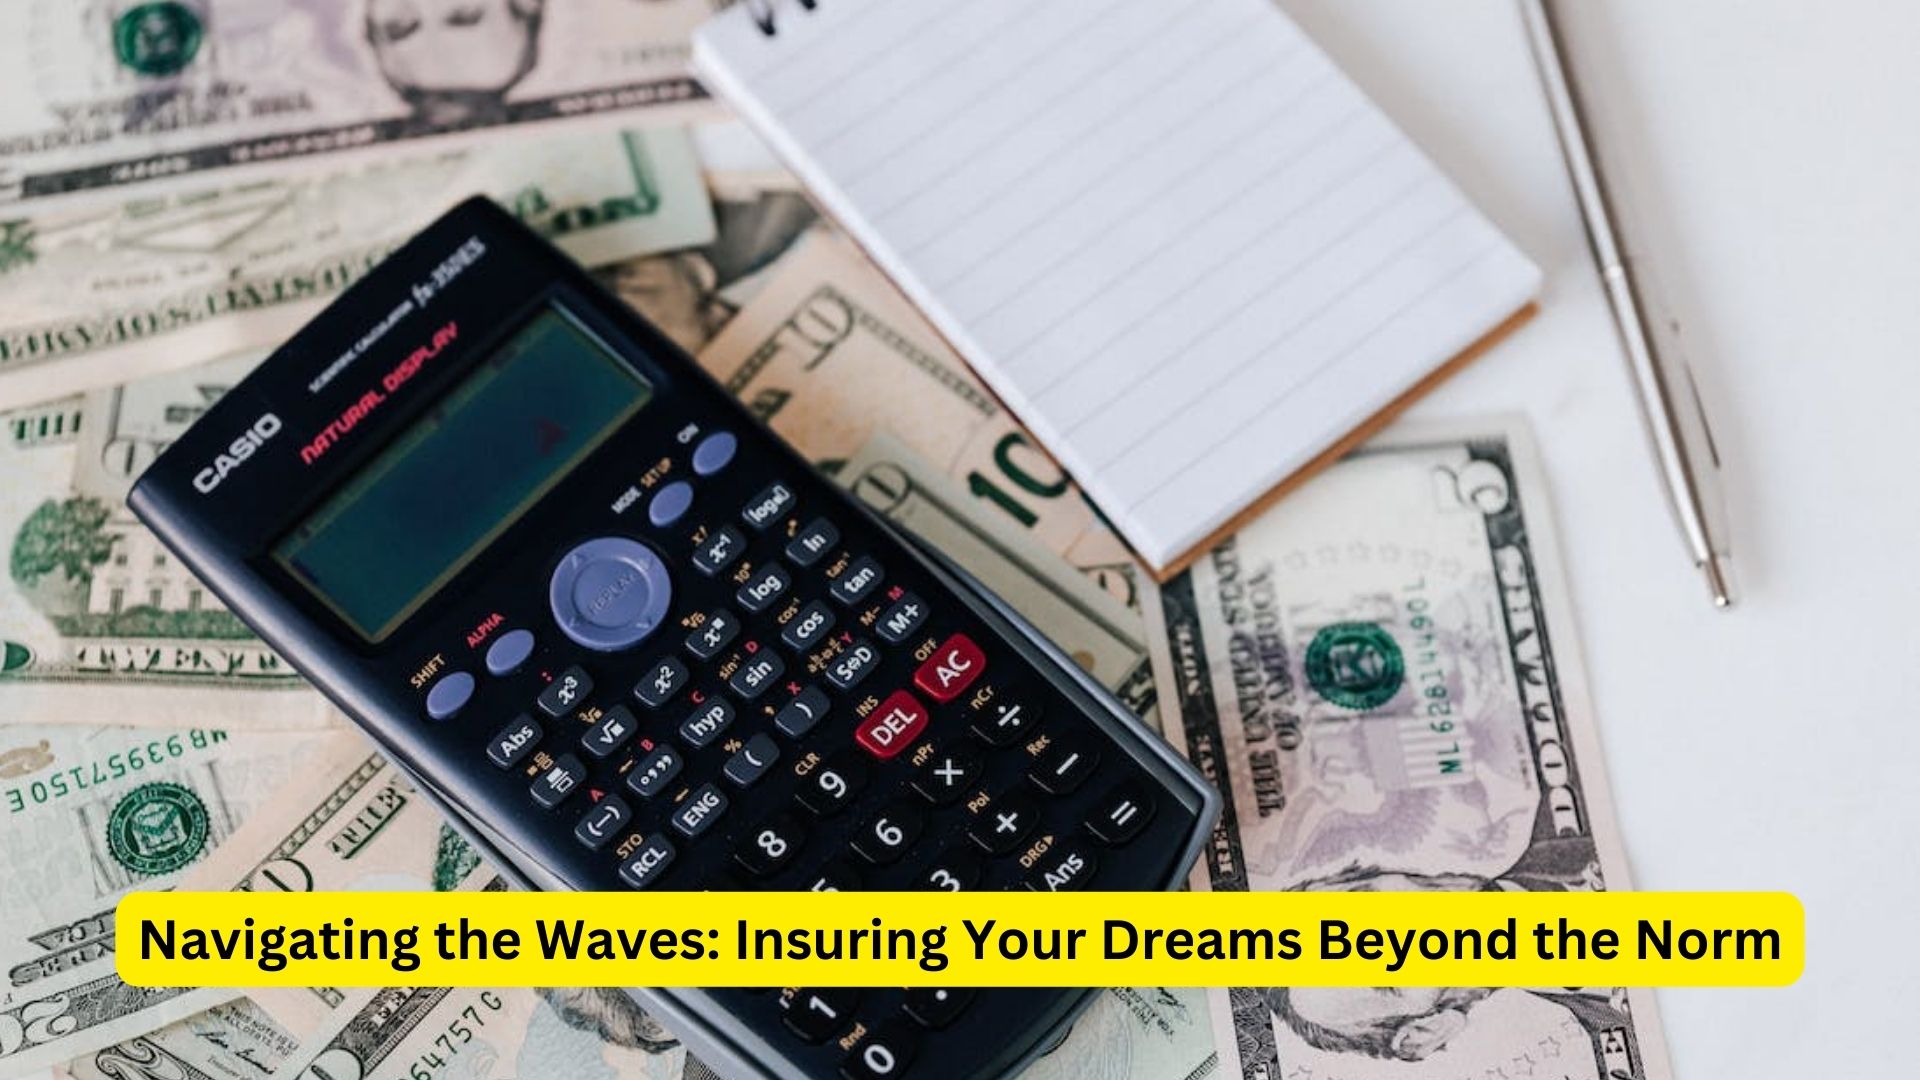 Navigating the Waves: Insuring Your Dreams Beyond the Norm